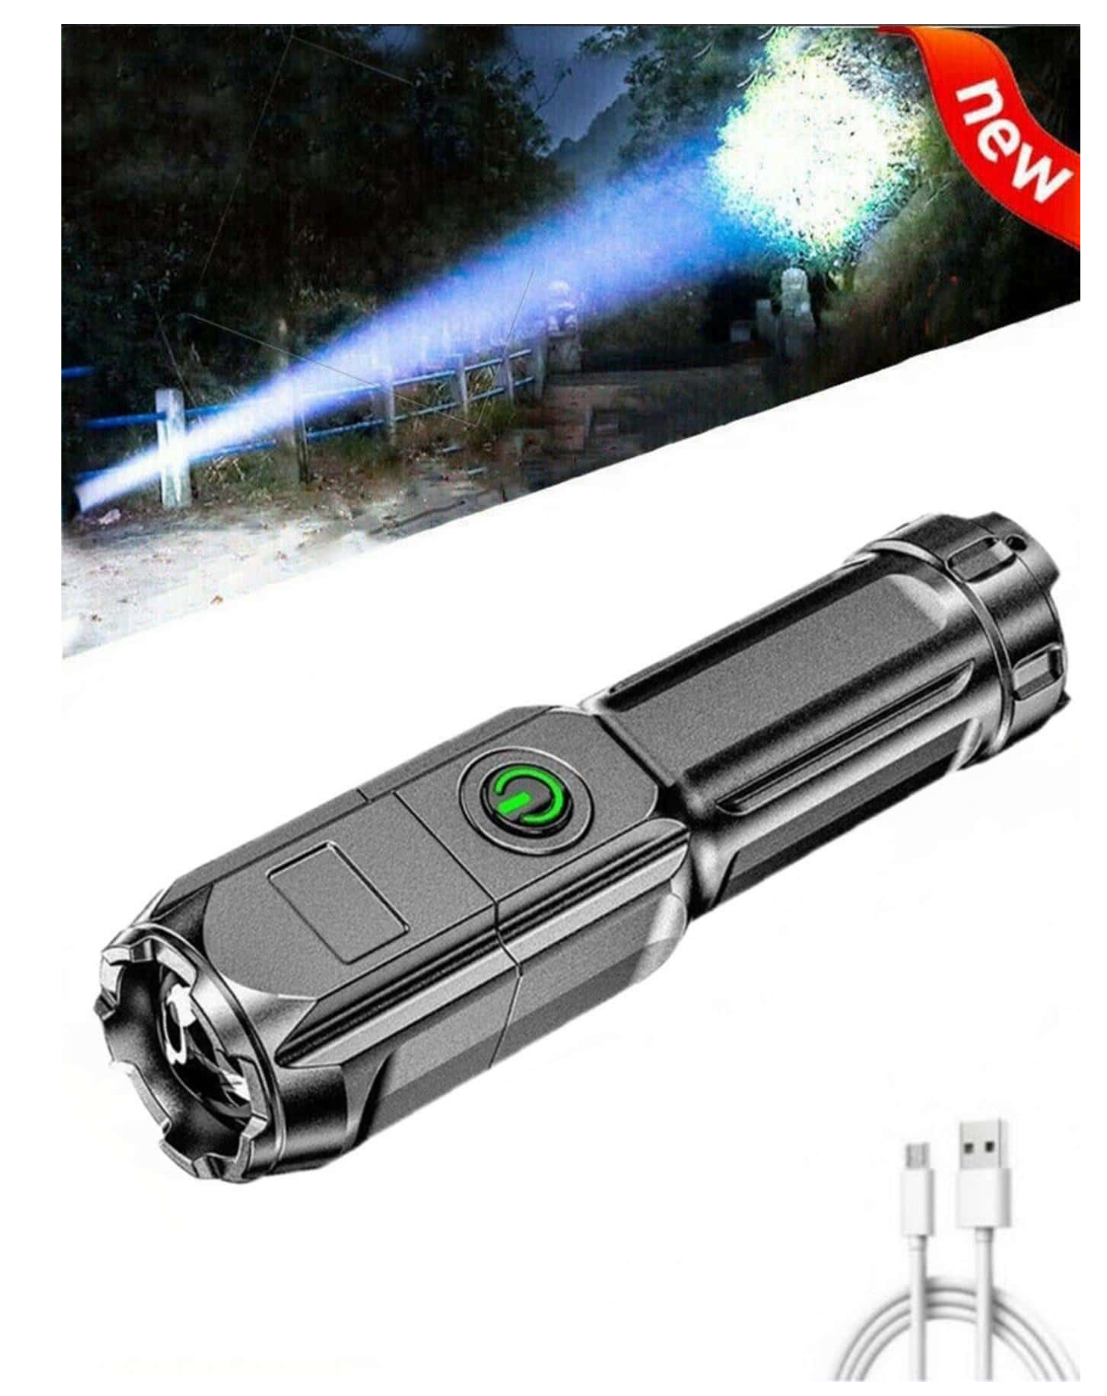 Illumination Innovation: Super Bright Rechargeable Multi-function Torch with ABS Build and Powerful LED Focus for Outdoor Adventures and Home Use